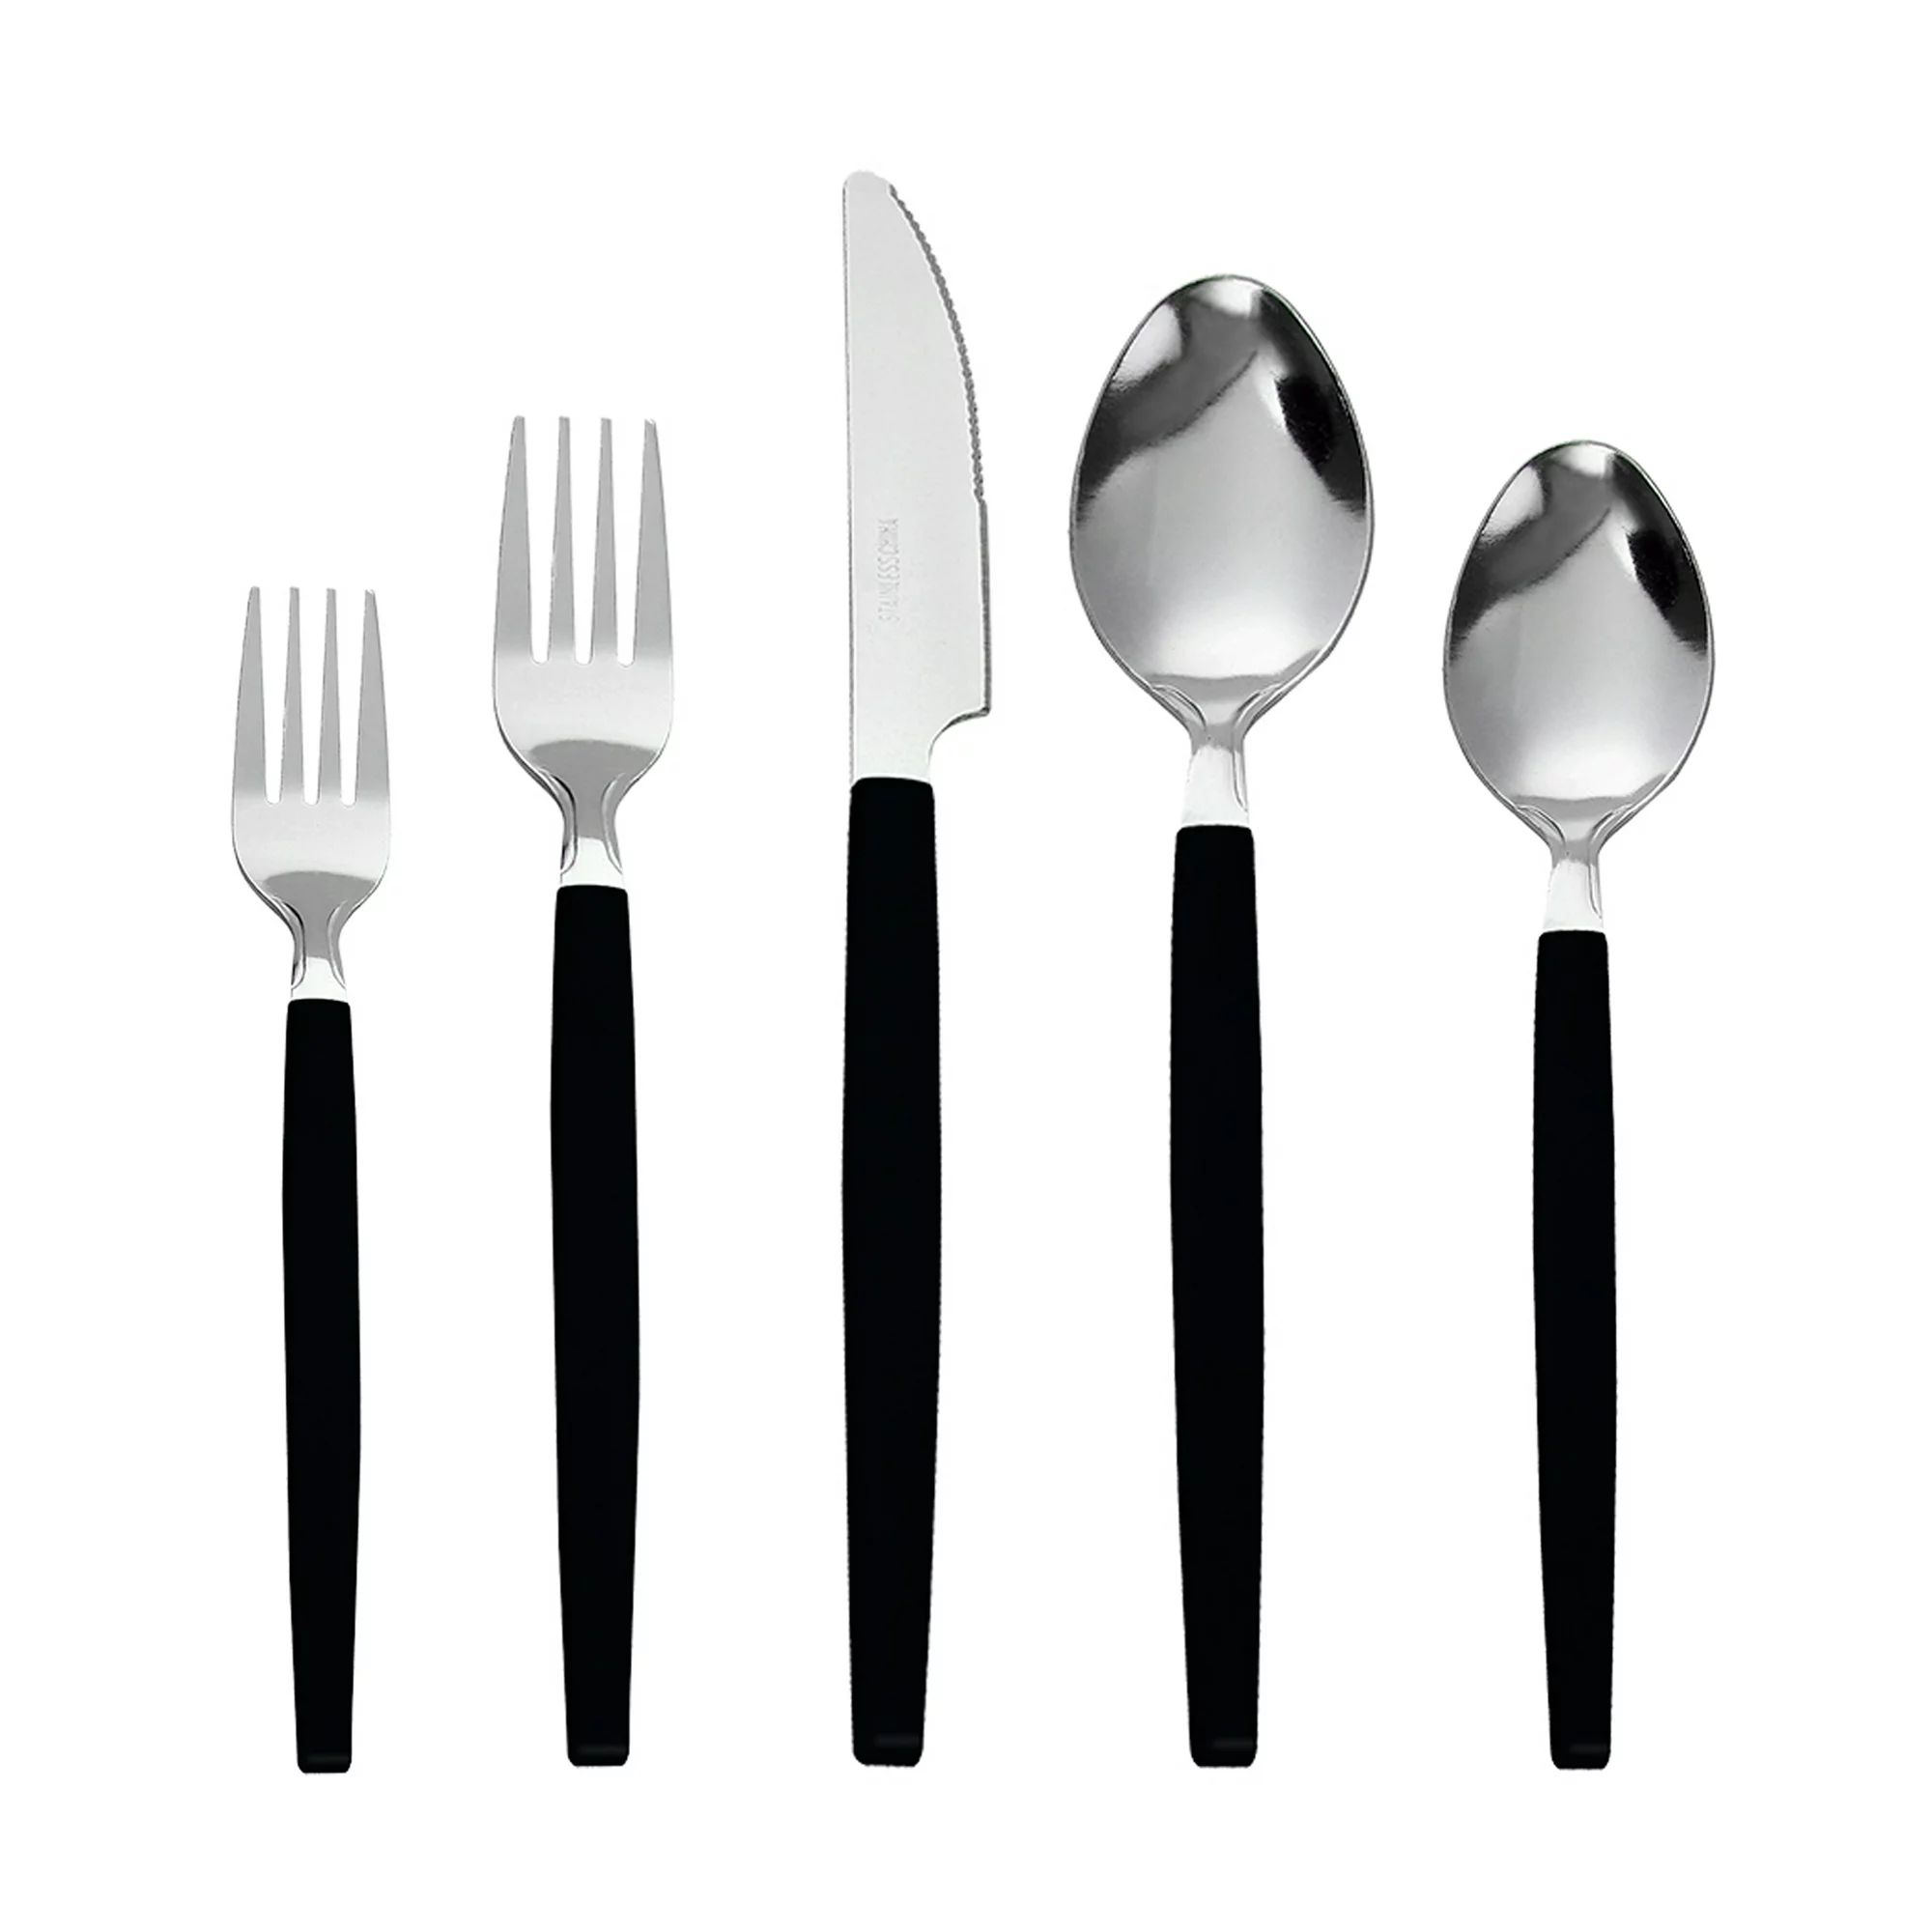 Mainstays 49 Piece Stainless Steel and Plastic Flatware Set with Organizer Tray, Black | Walmart (US)